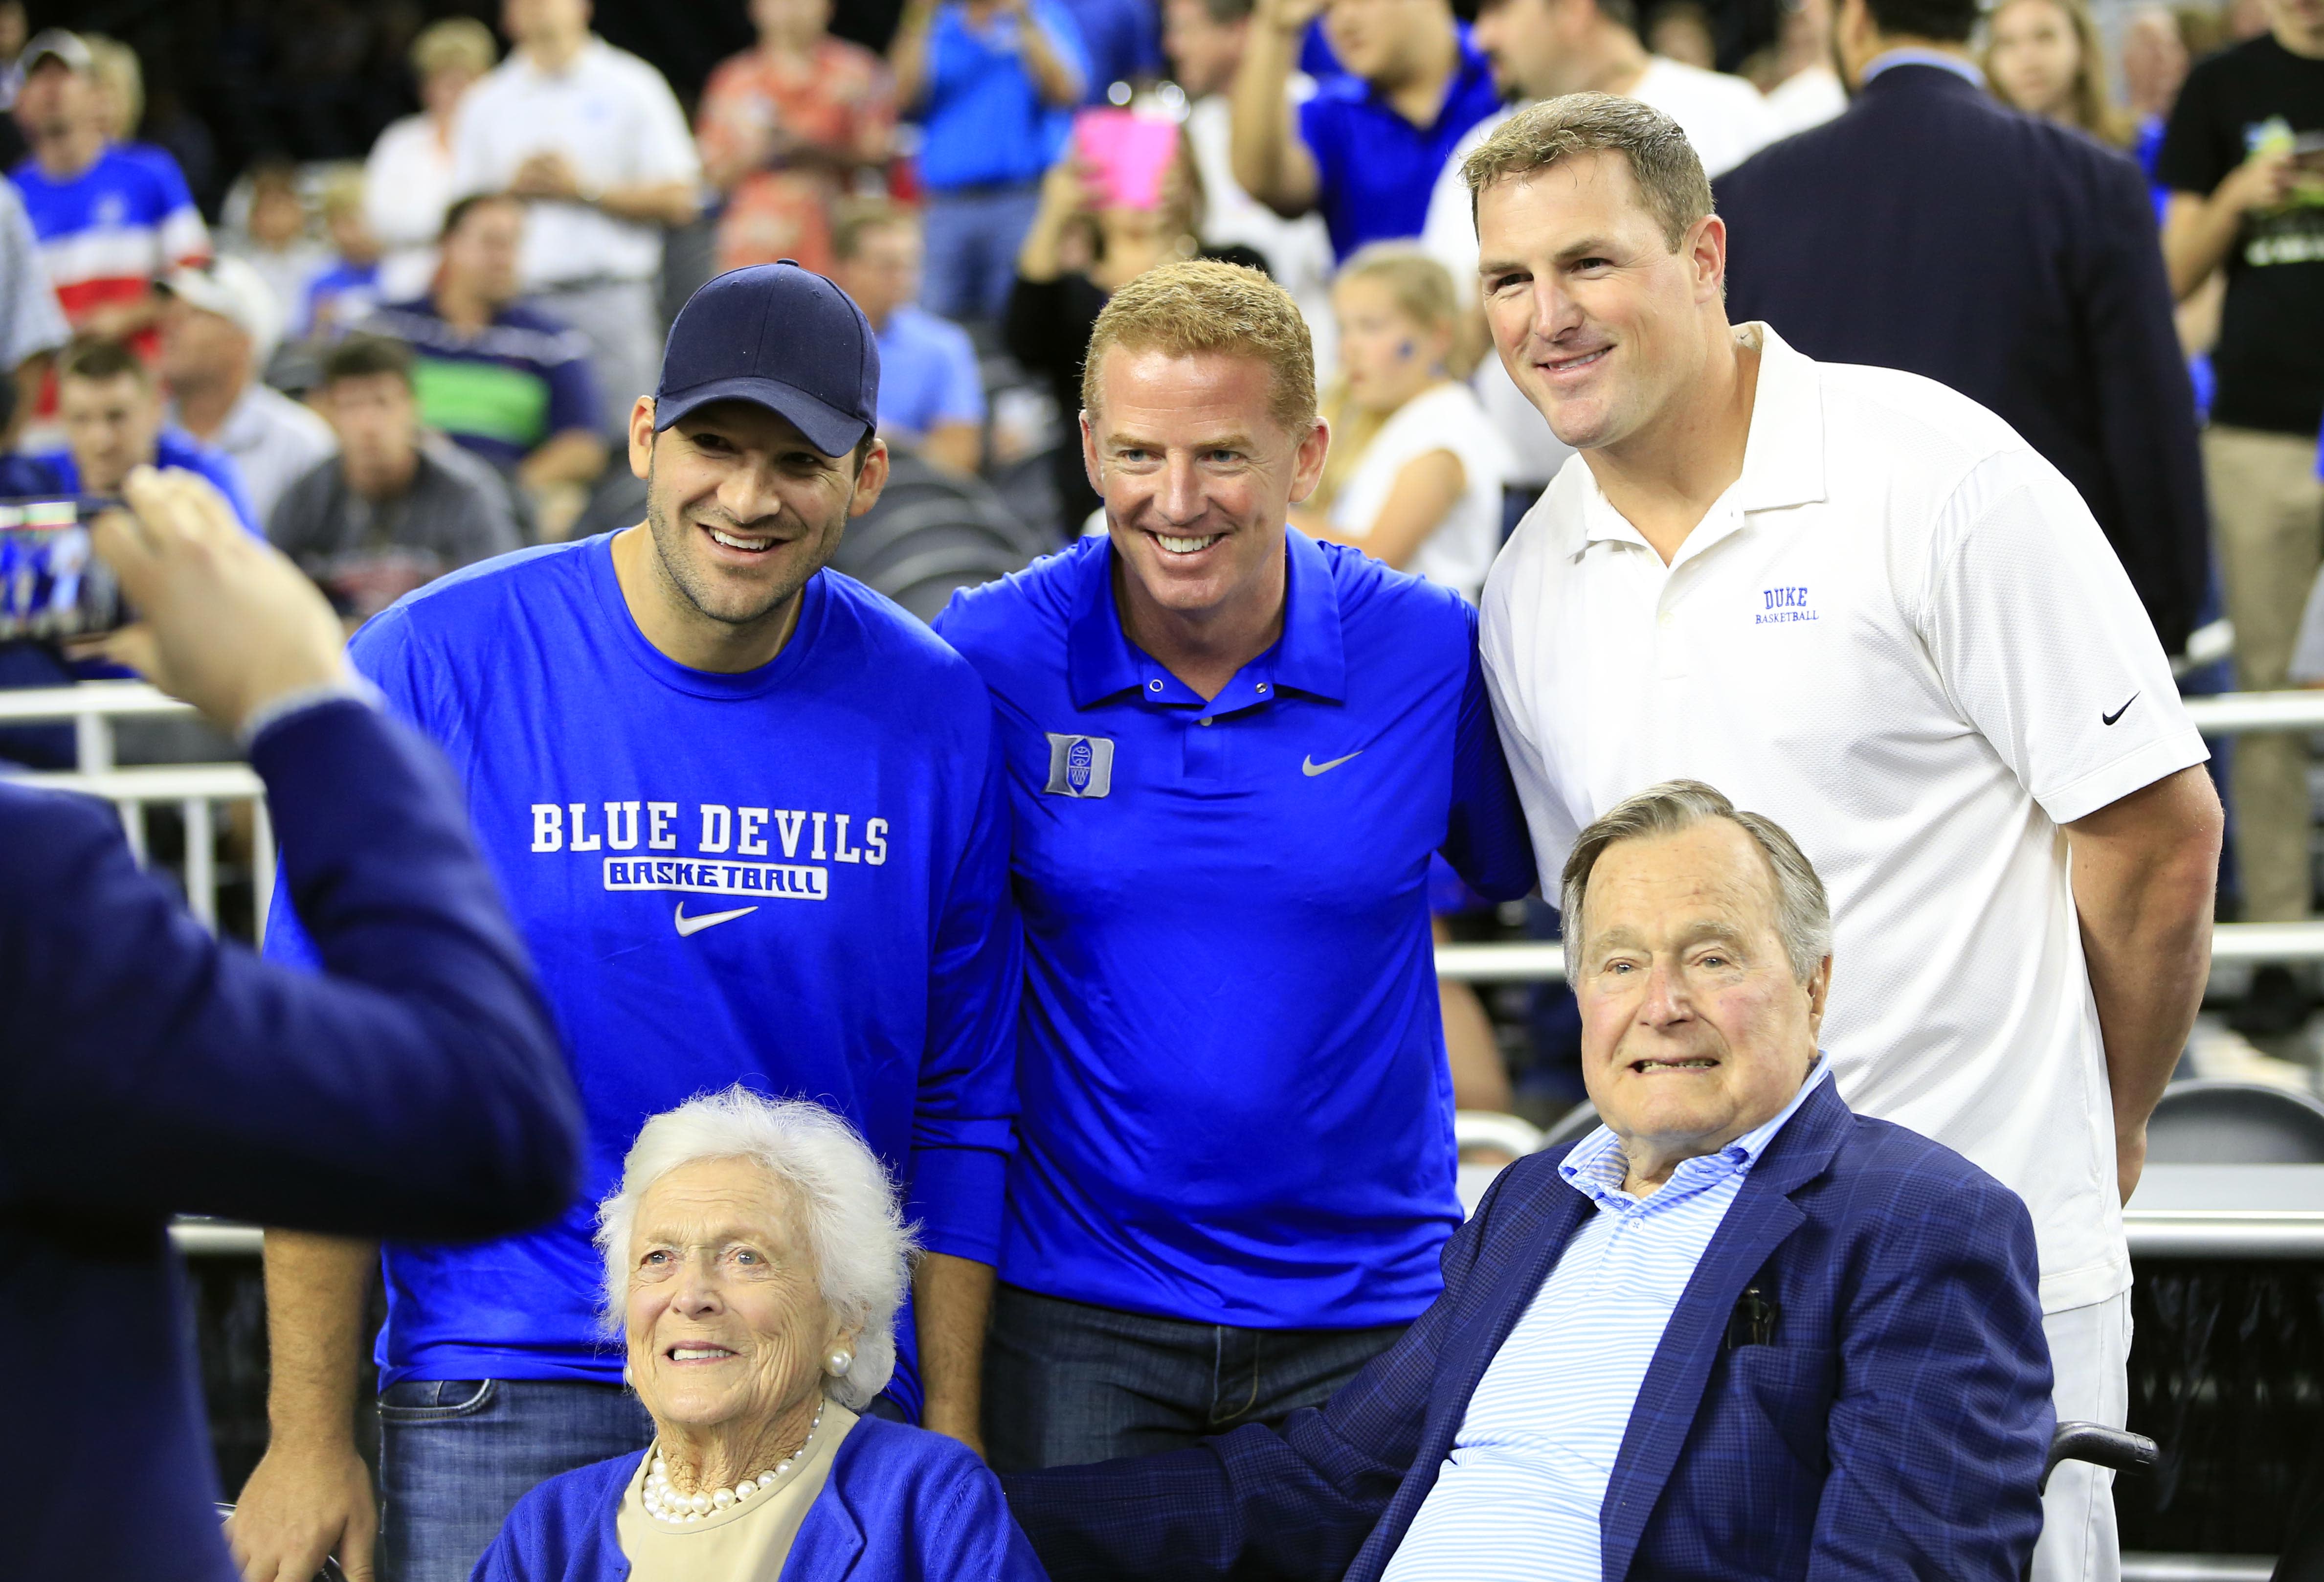 George H.W. Bush shows support for Duke in Houston4752 x 3234